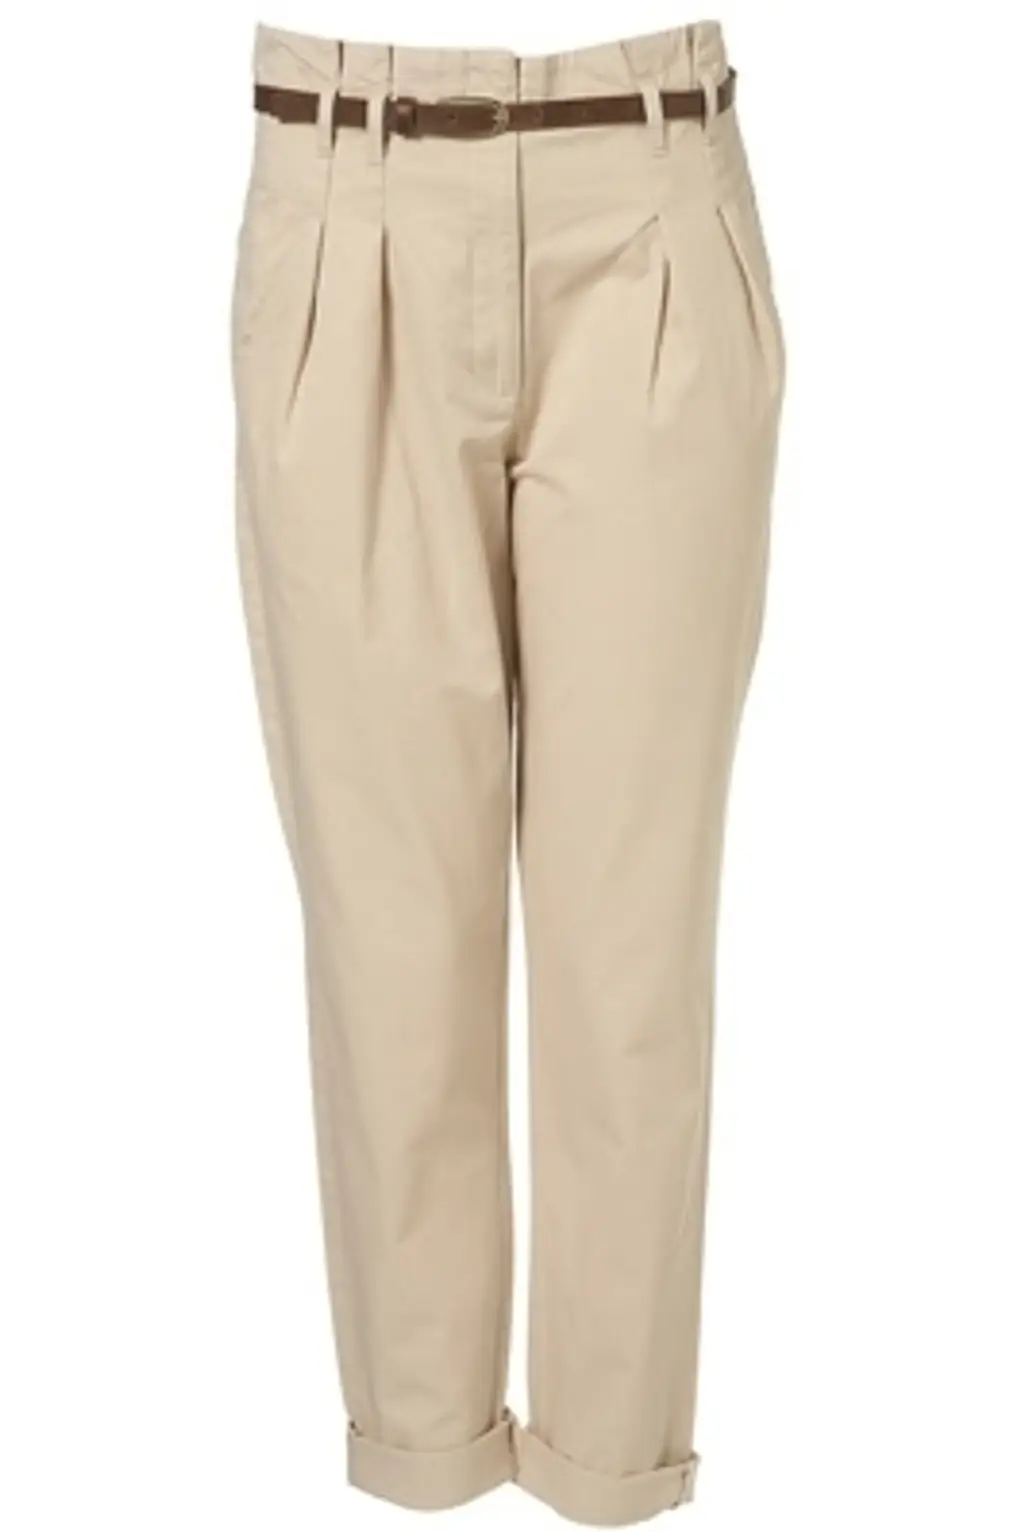 Topshop Light Stone High Waisted Belted Chinos